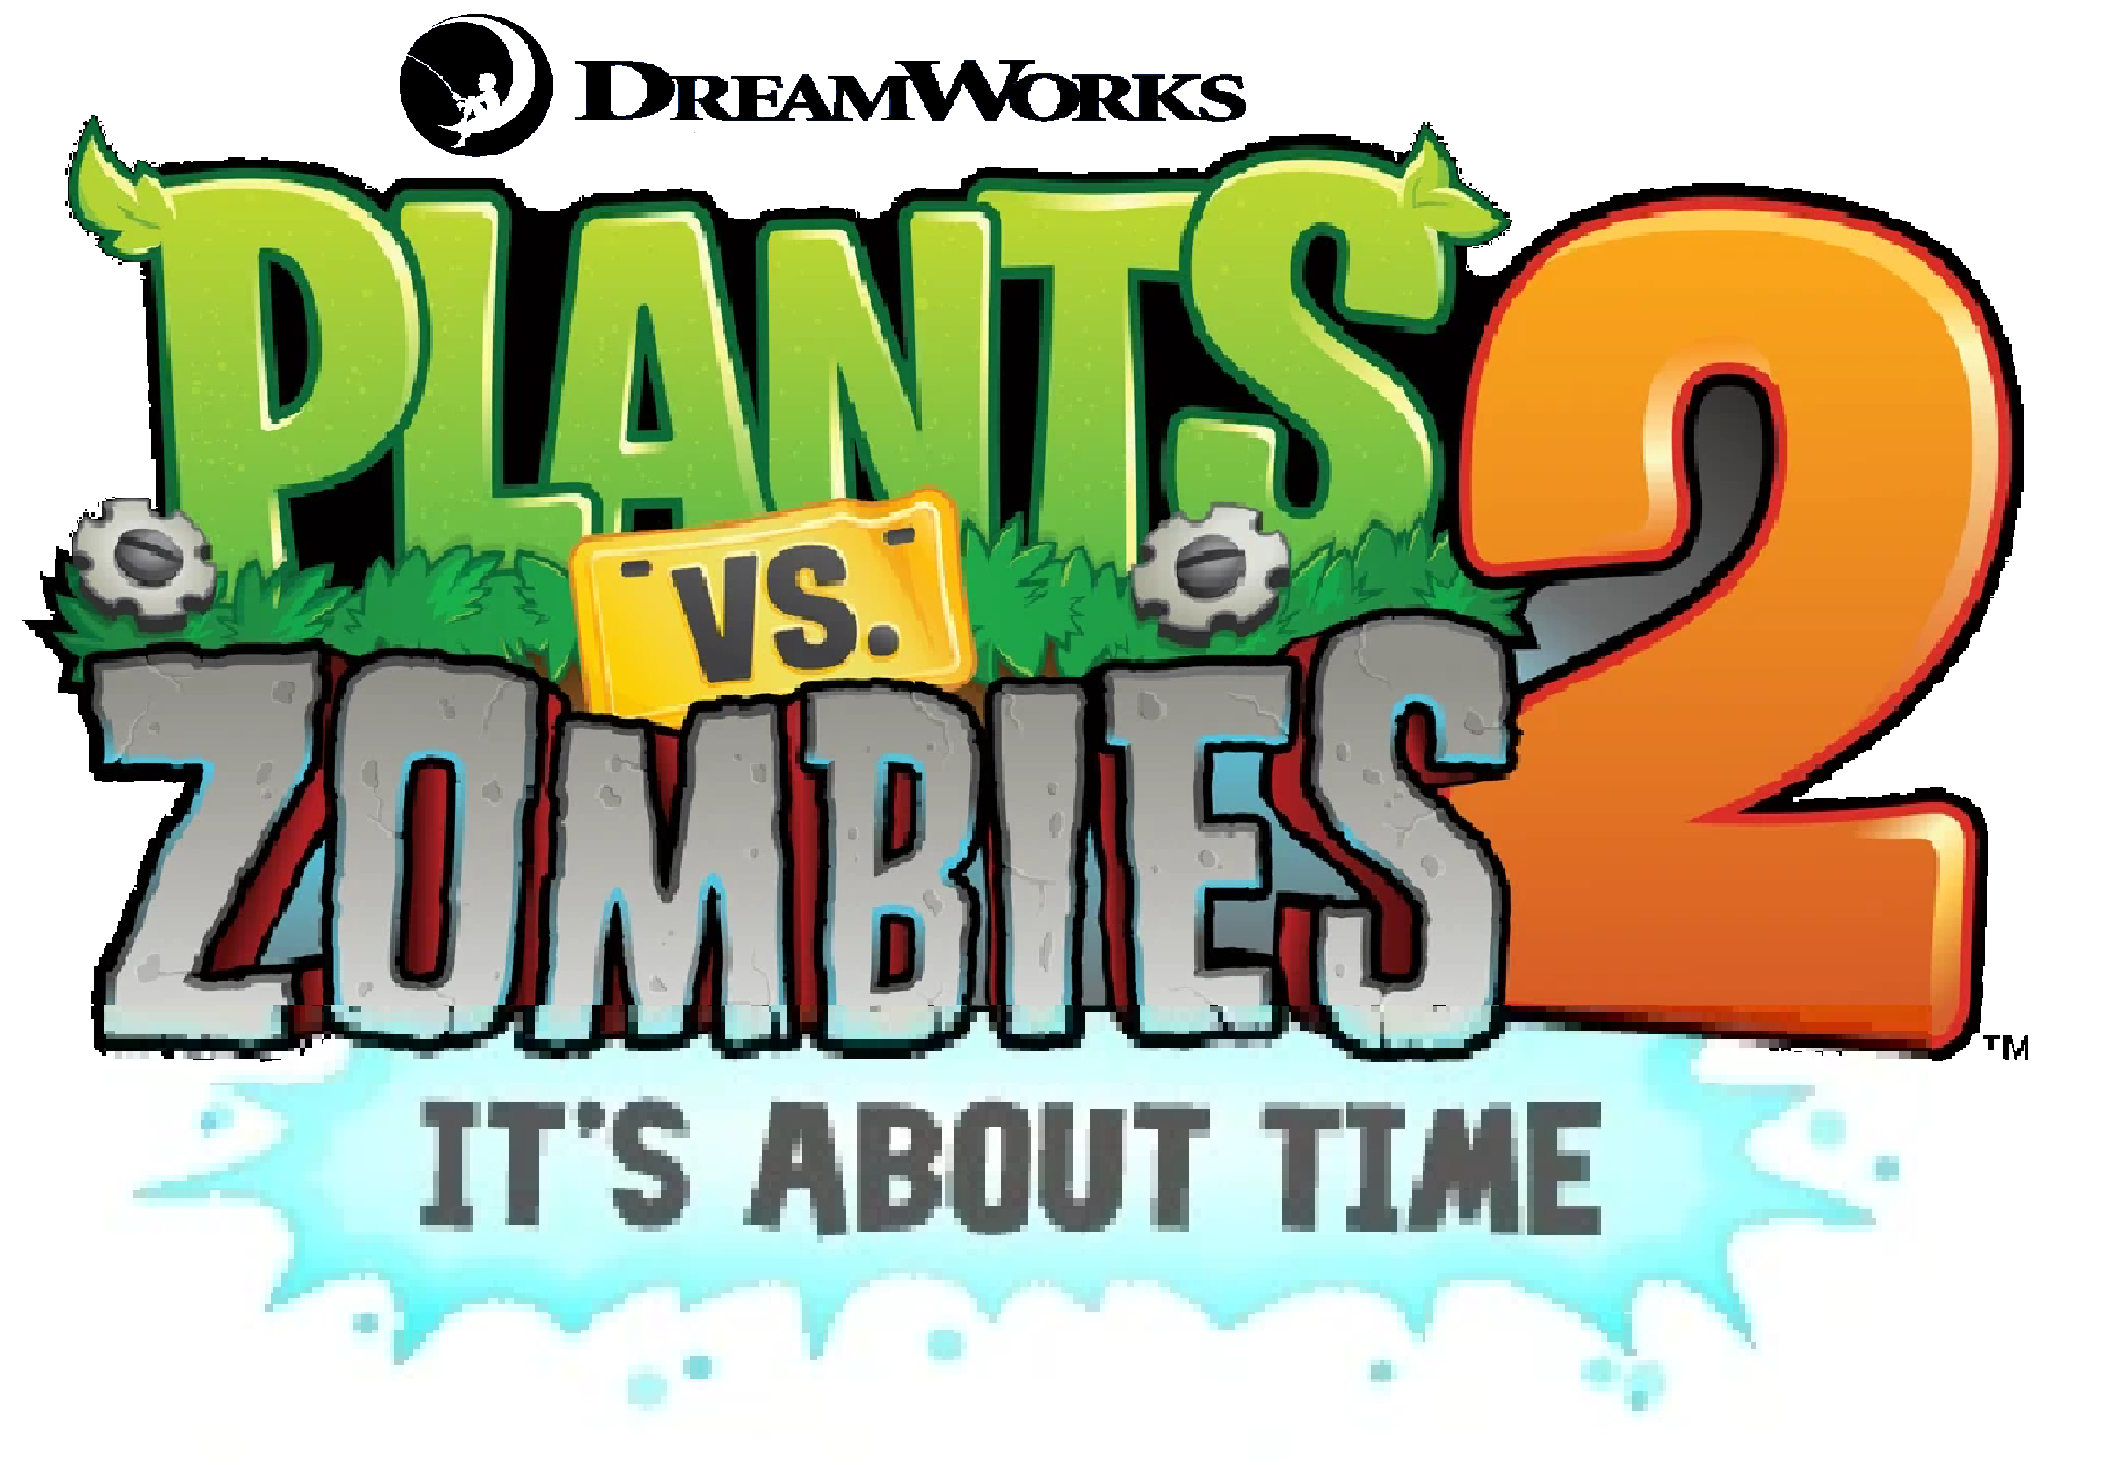 the poster of the movie plants vs zombiesgives me nightmares :  r/PlantsVSZombies